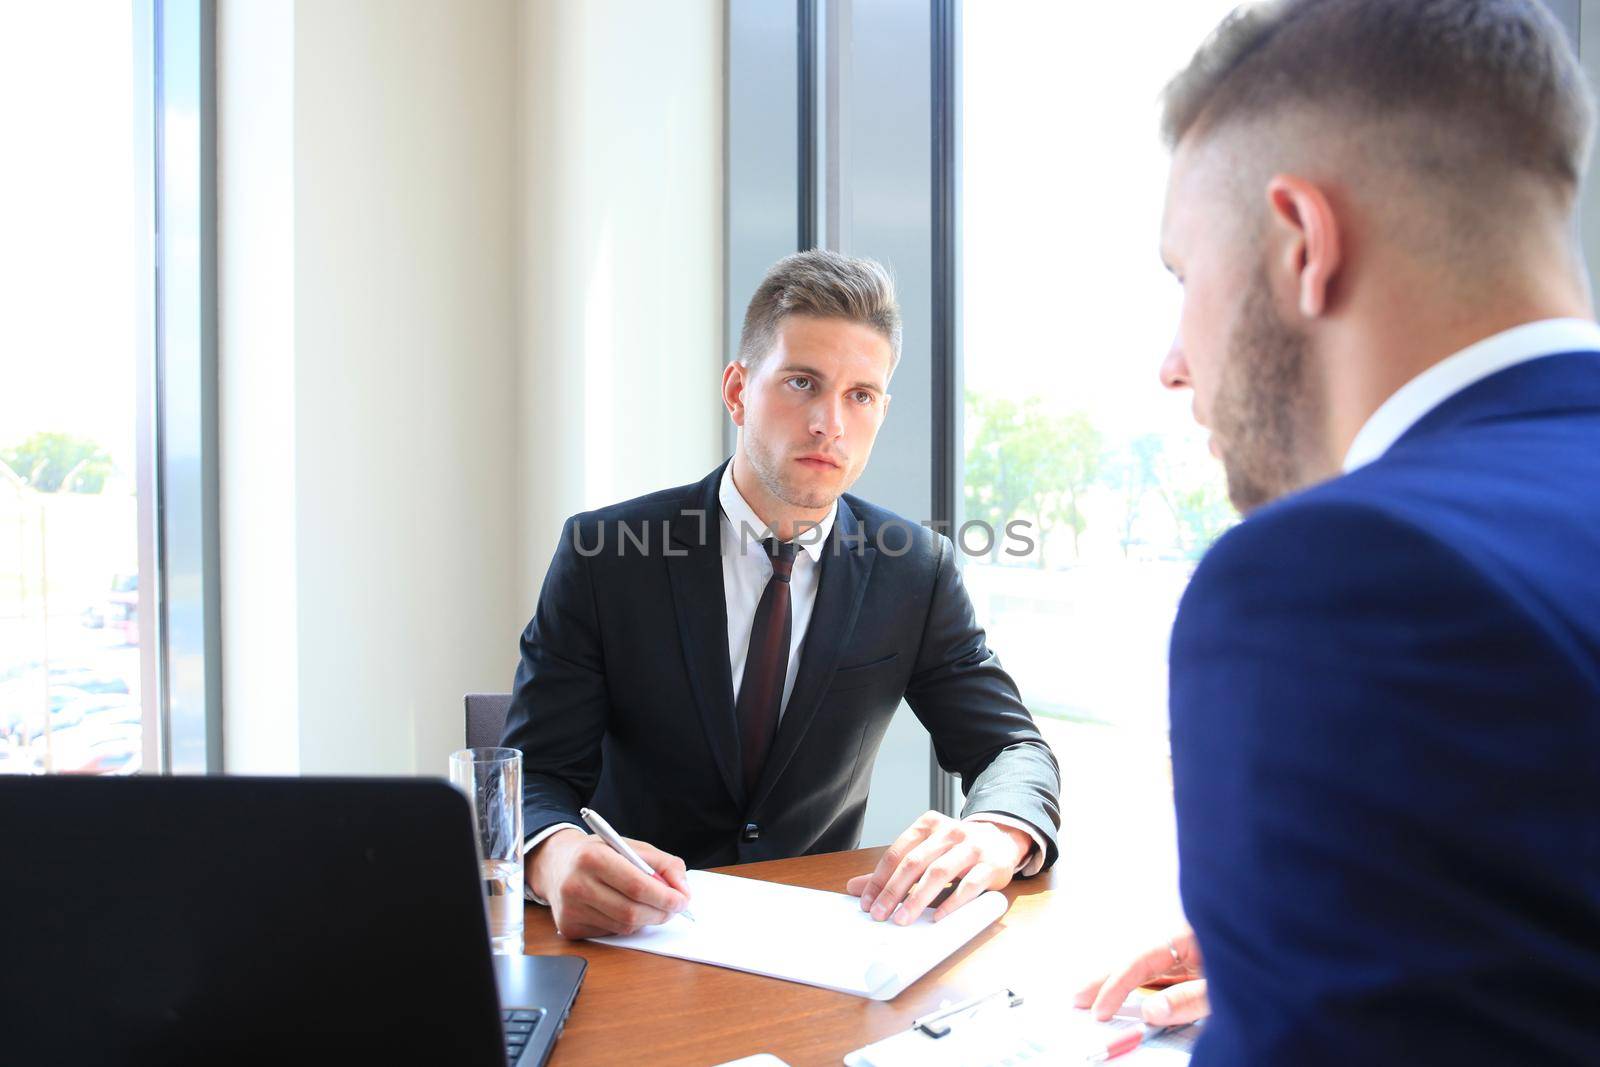 Recruiter checking the candidate during job interview